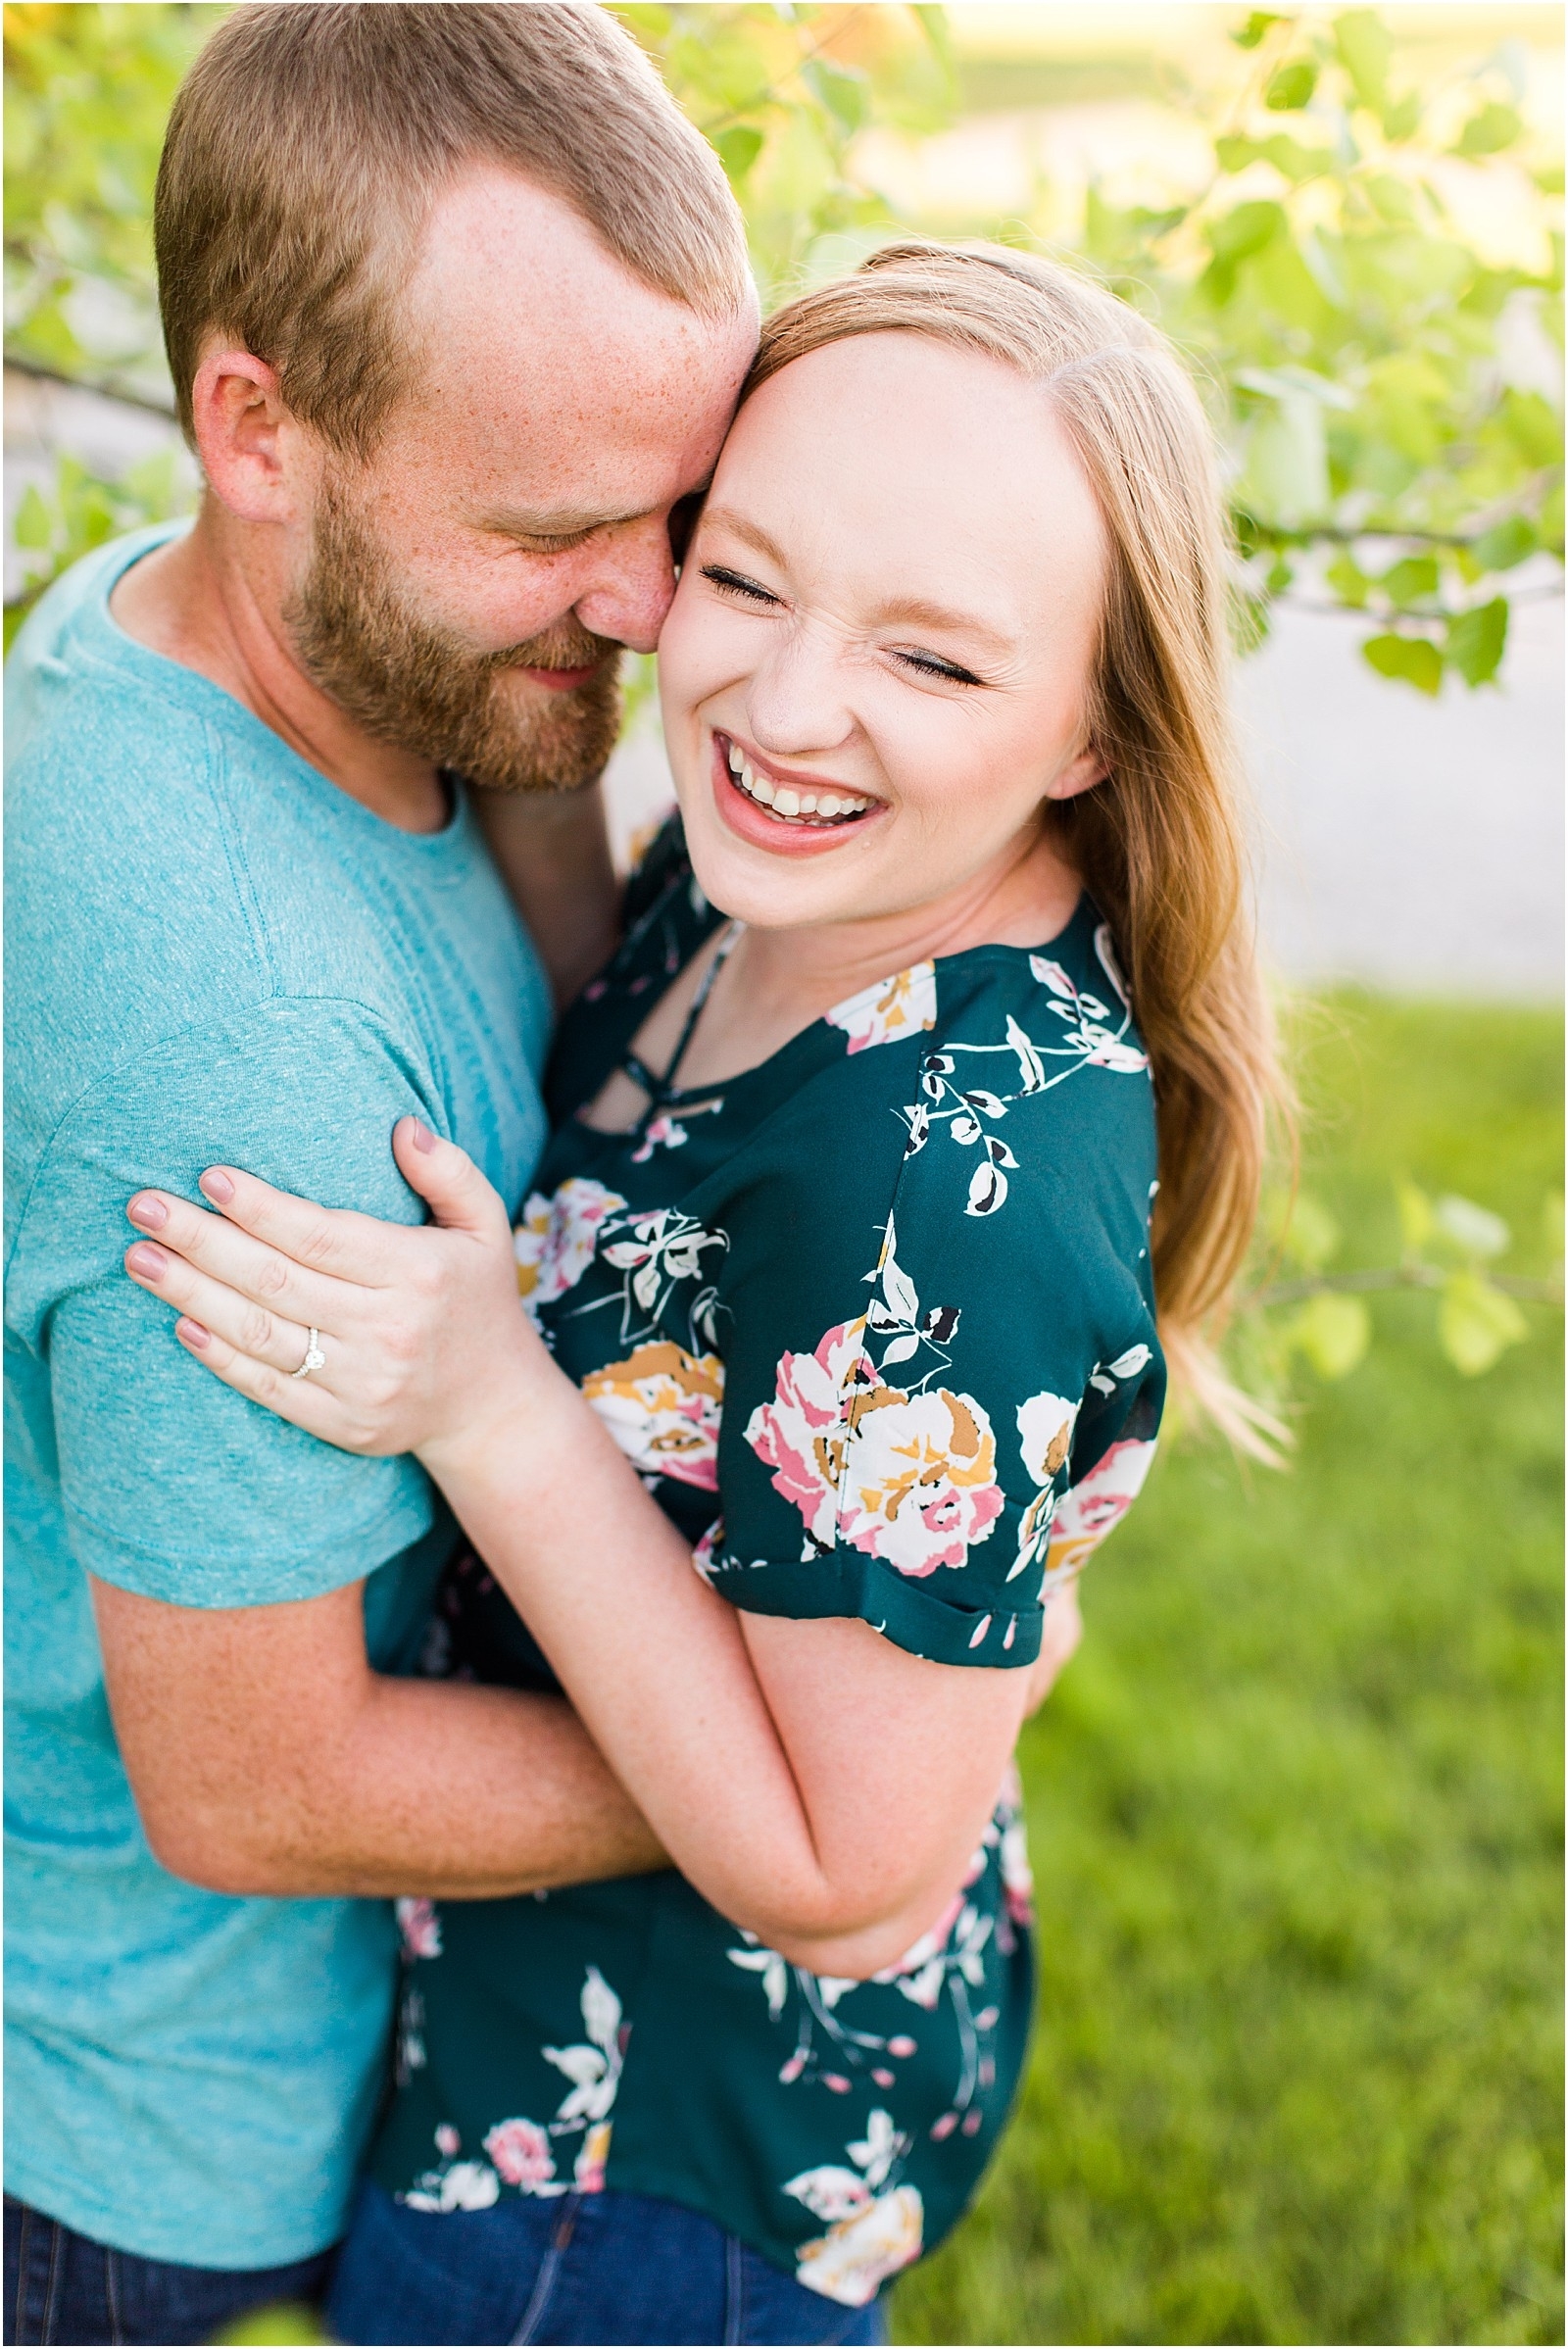 The Best of Engagement Sessions 2020 Recap0042.jpg